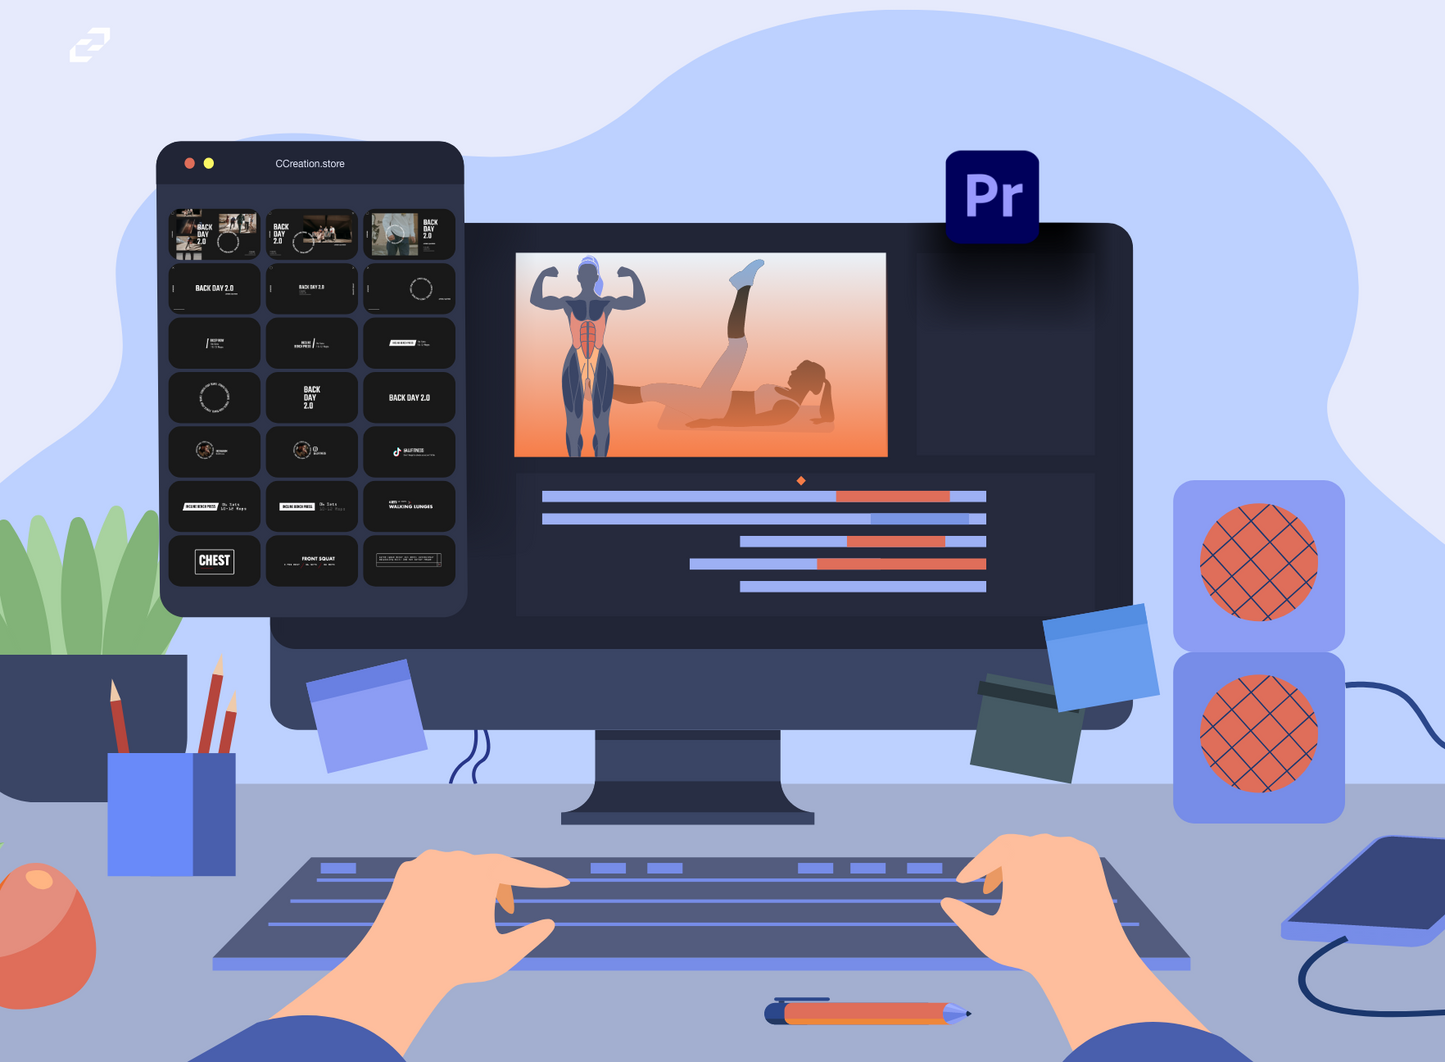 The Editor's Beginner Guide to Adobe Premiere Pro